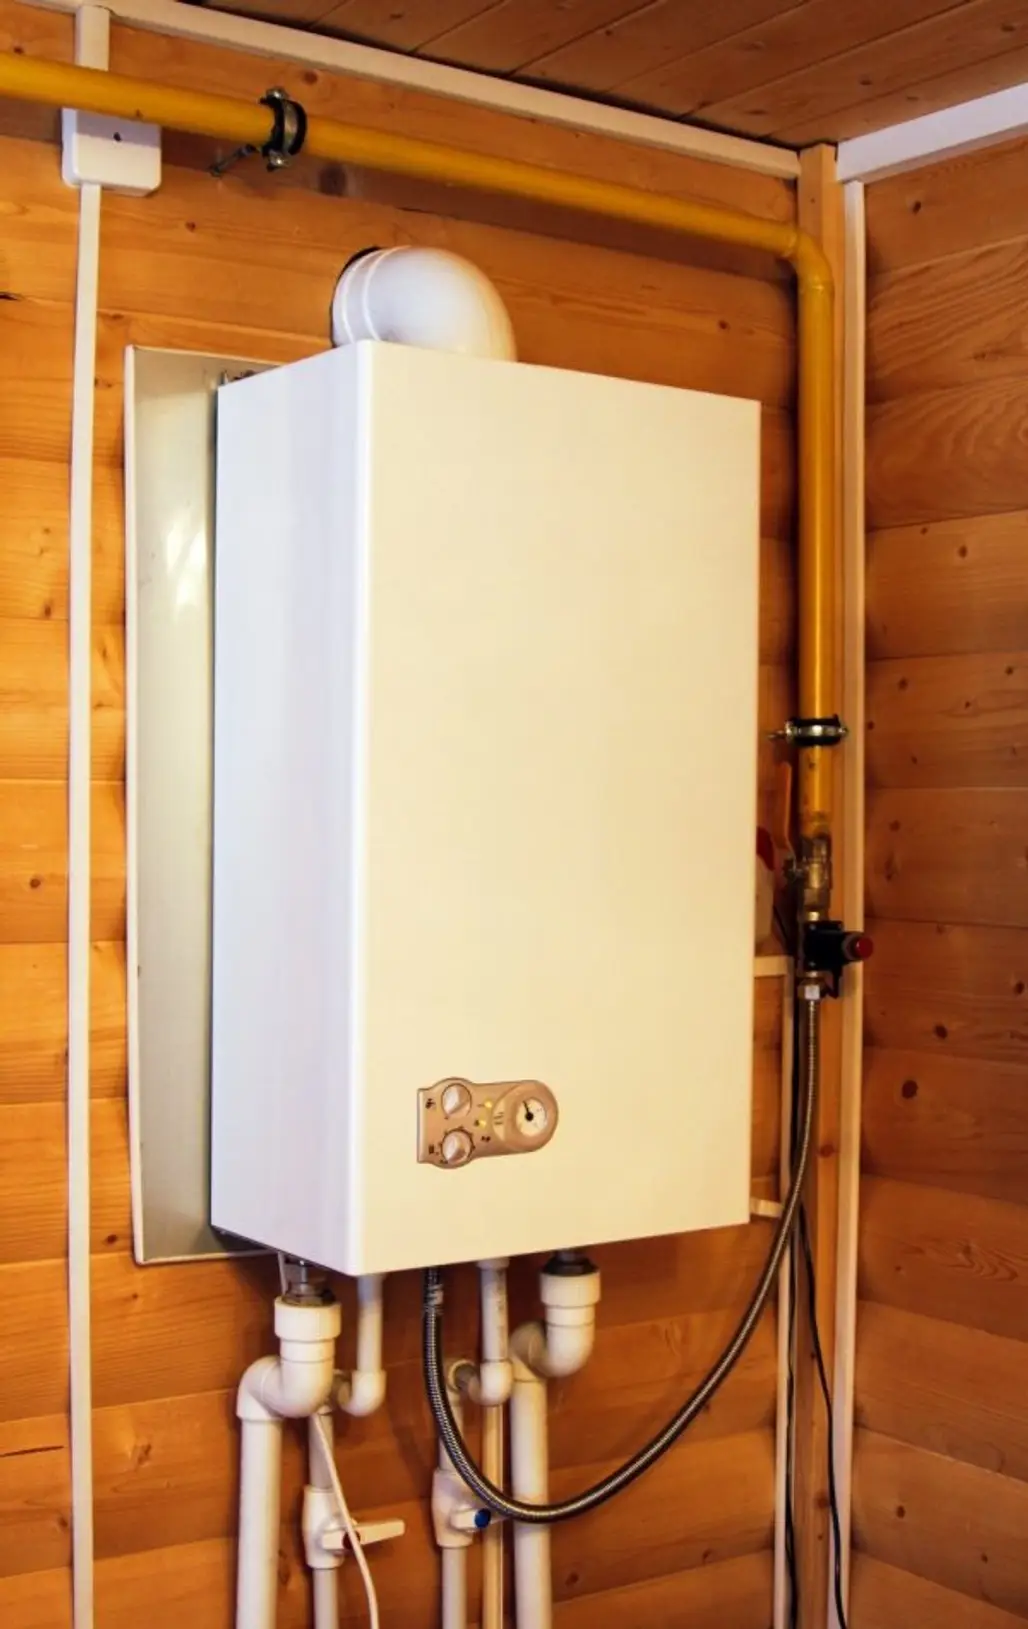 Opt for Tank-less Water Heaters